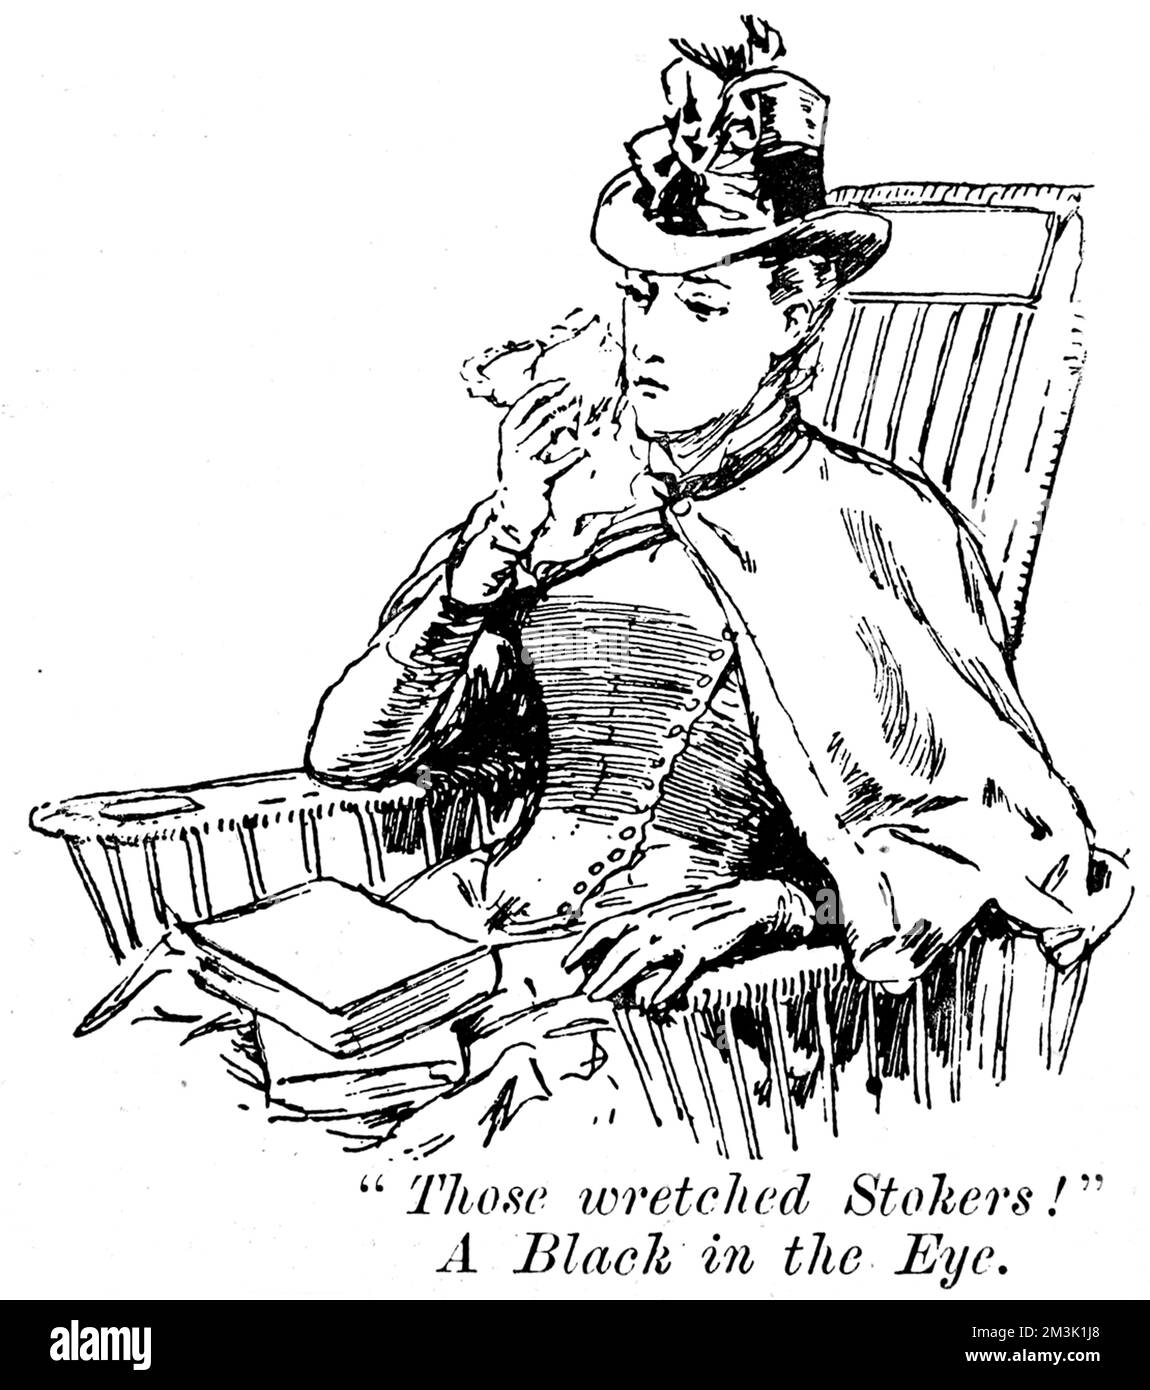 Illustration showing a female passenger on the trans-Atlantic steamship 'Moselle', relaxing on her deckchair with a book, 1888.      Dressed in the height of fashion, with an elaborate hat, the woman appears to have received a small piece of debris in the eye, hence the original caption: 'Those wretched stokers, A Black in the Eye'.     Date: 1888 Stock Photo